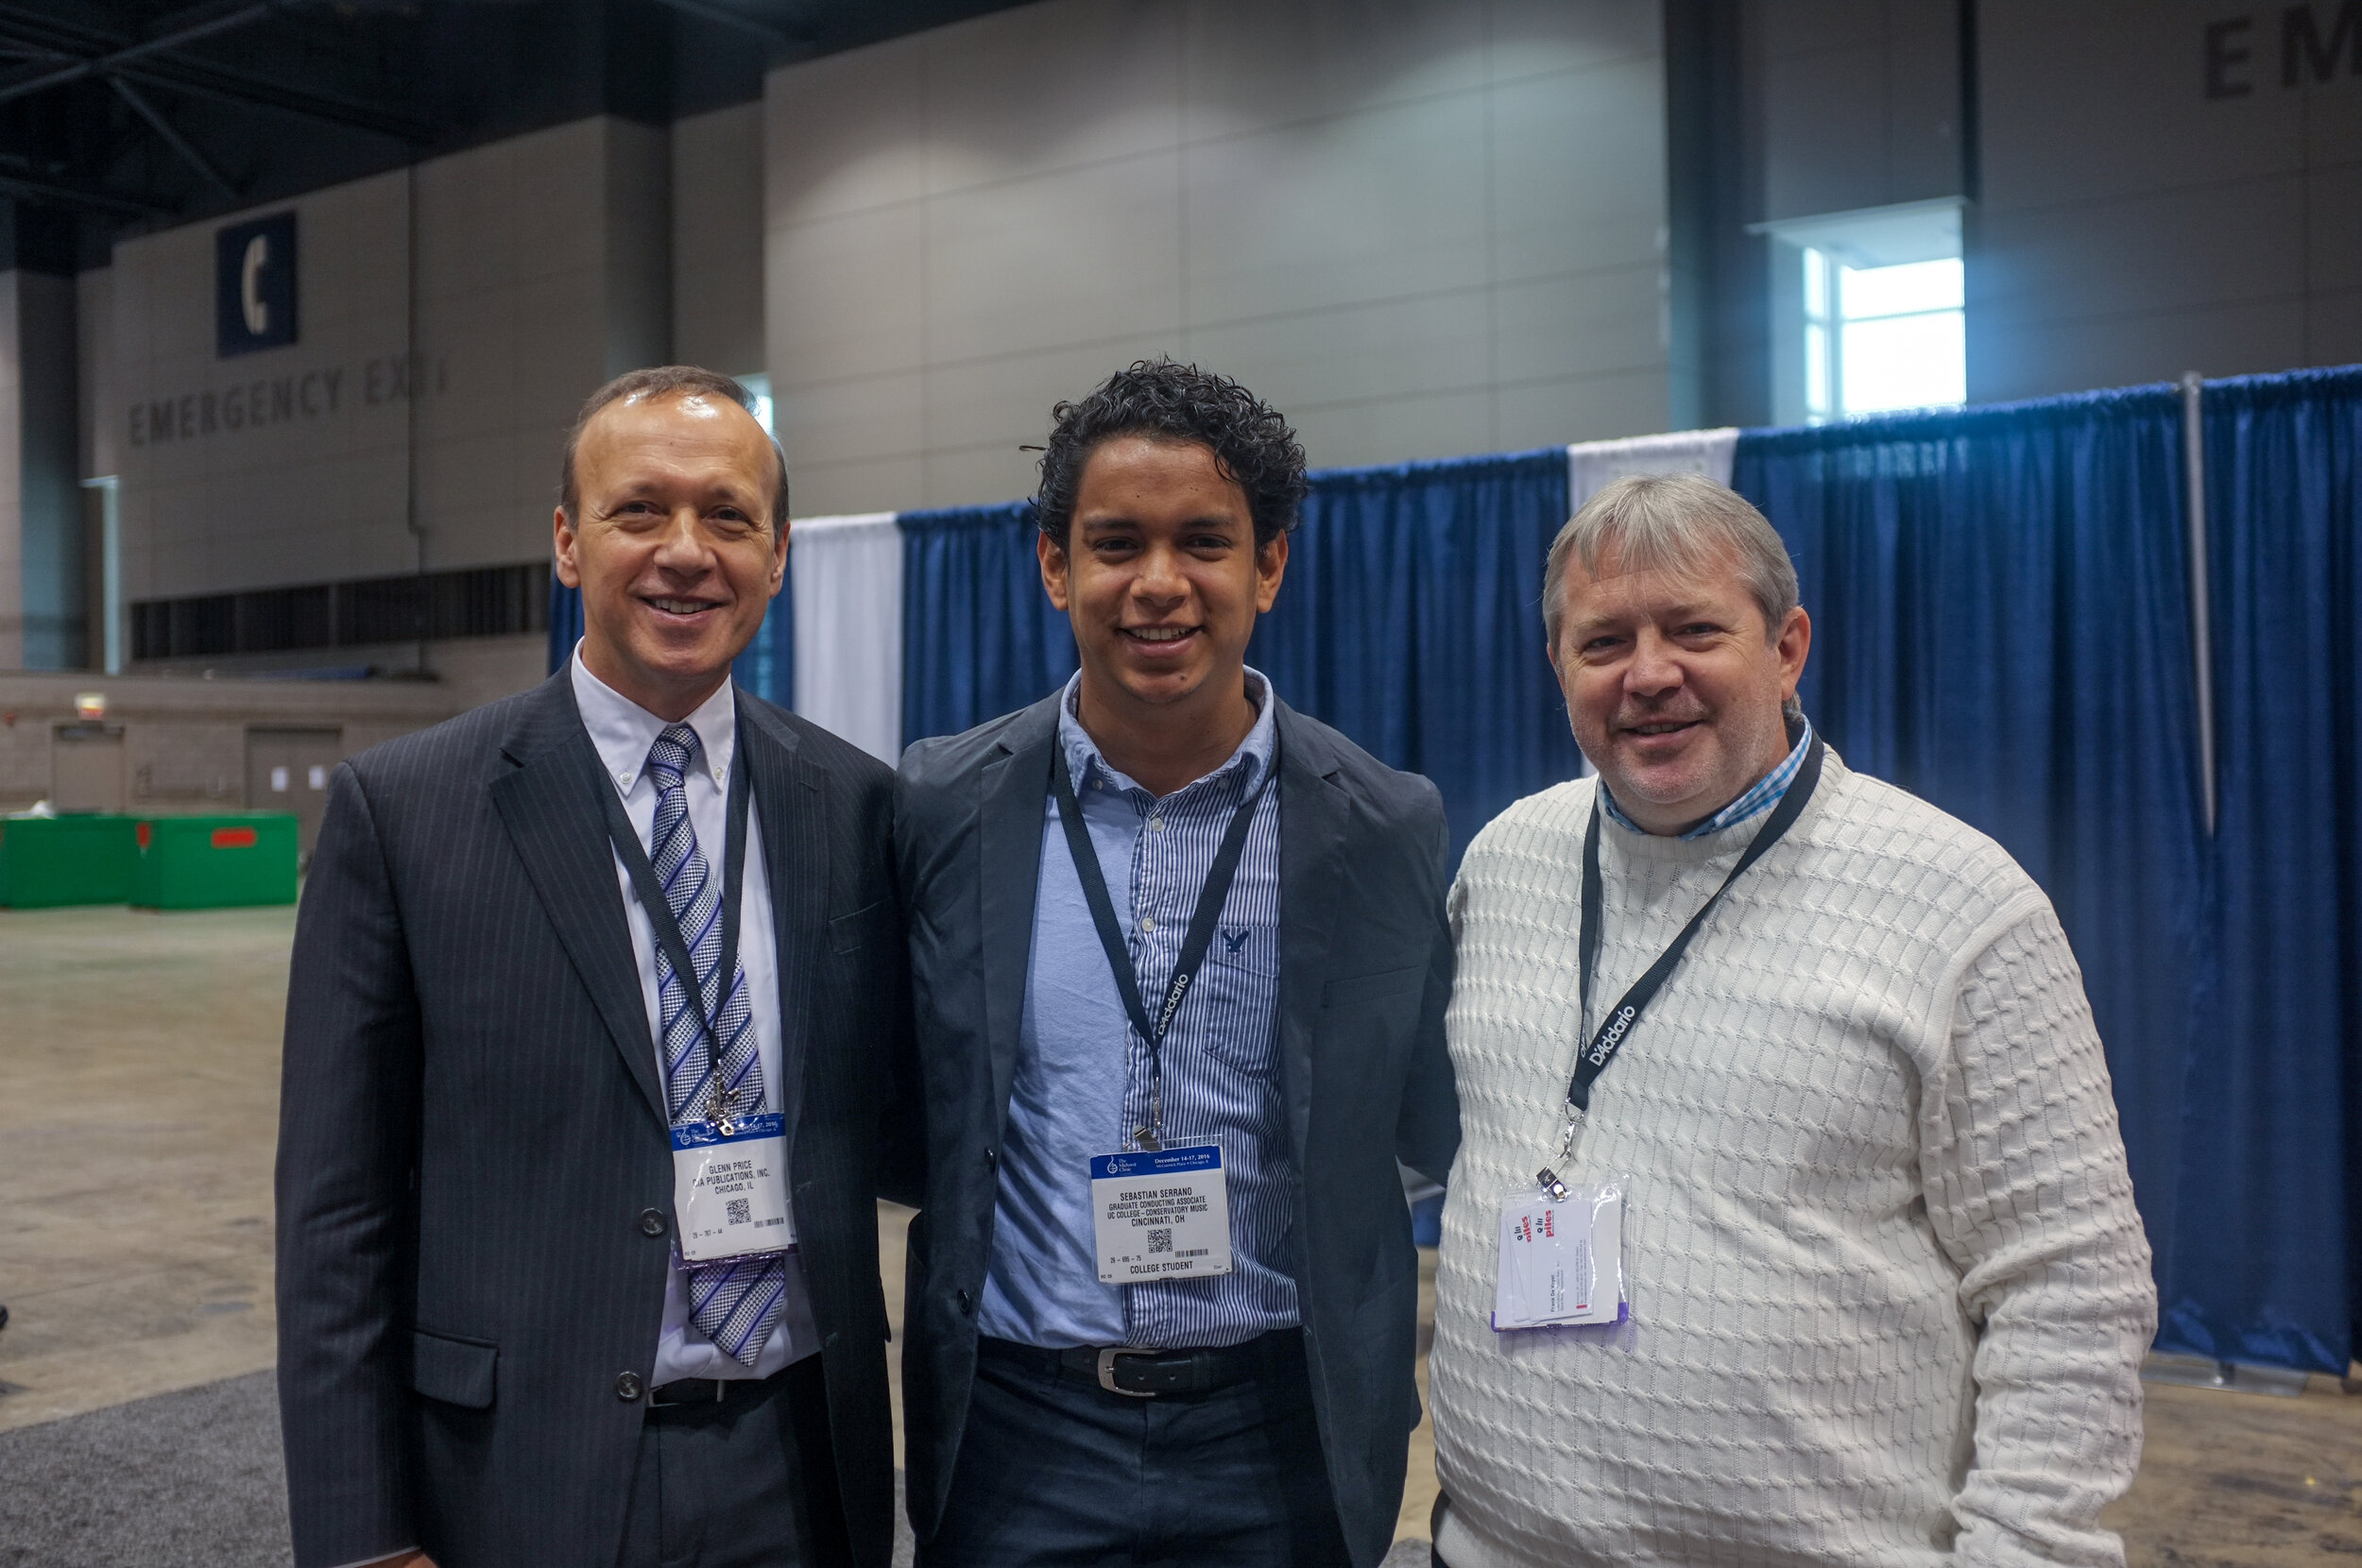 With Glenn Price and Frank d'Vuyst at Midwest Clinic, Chicago